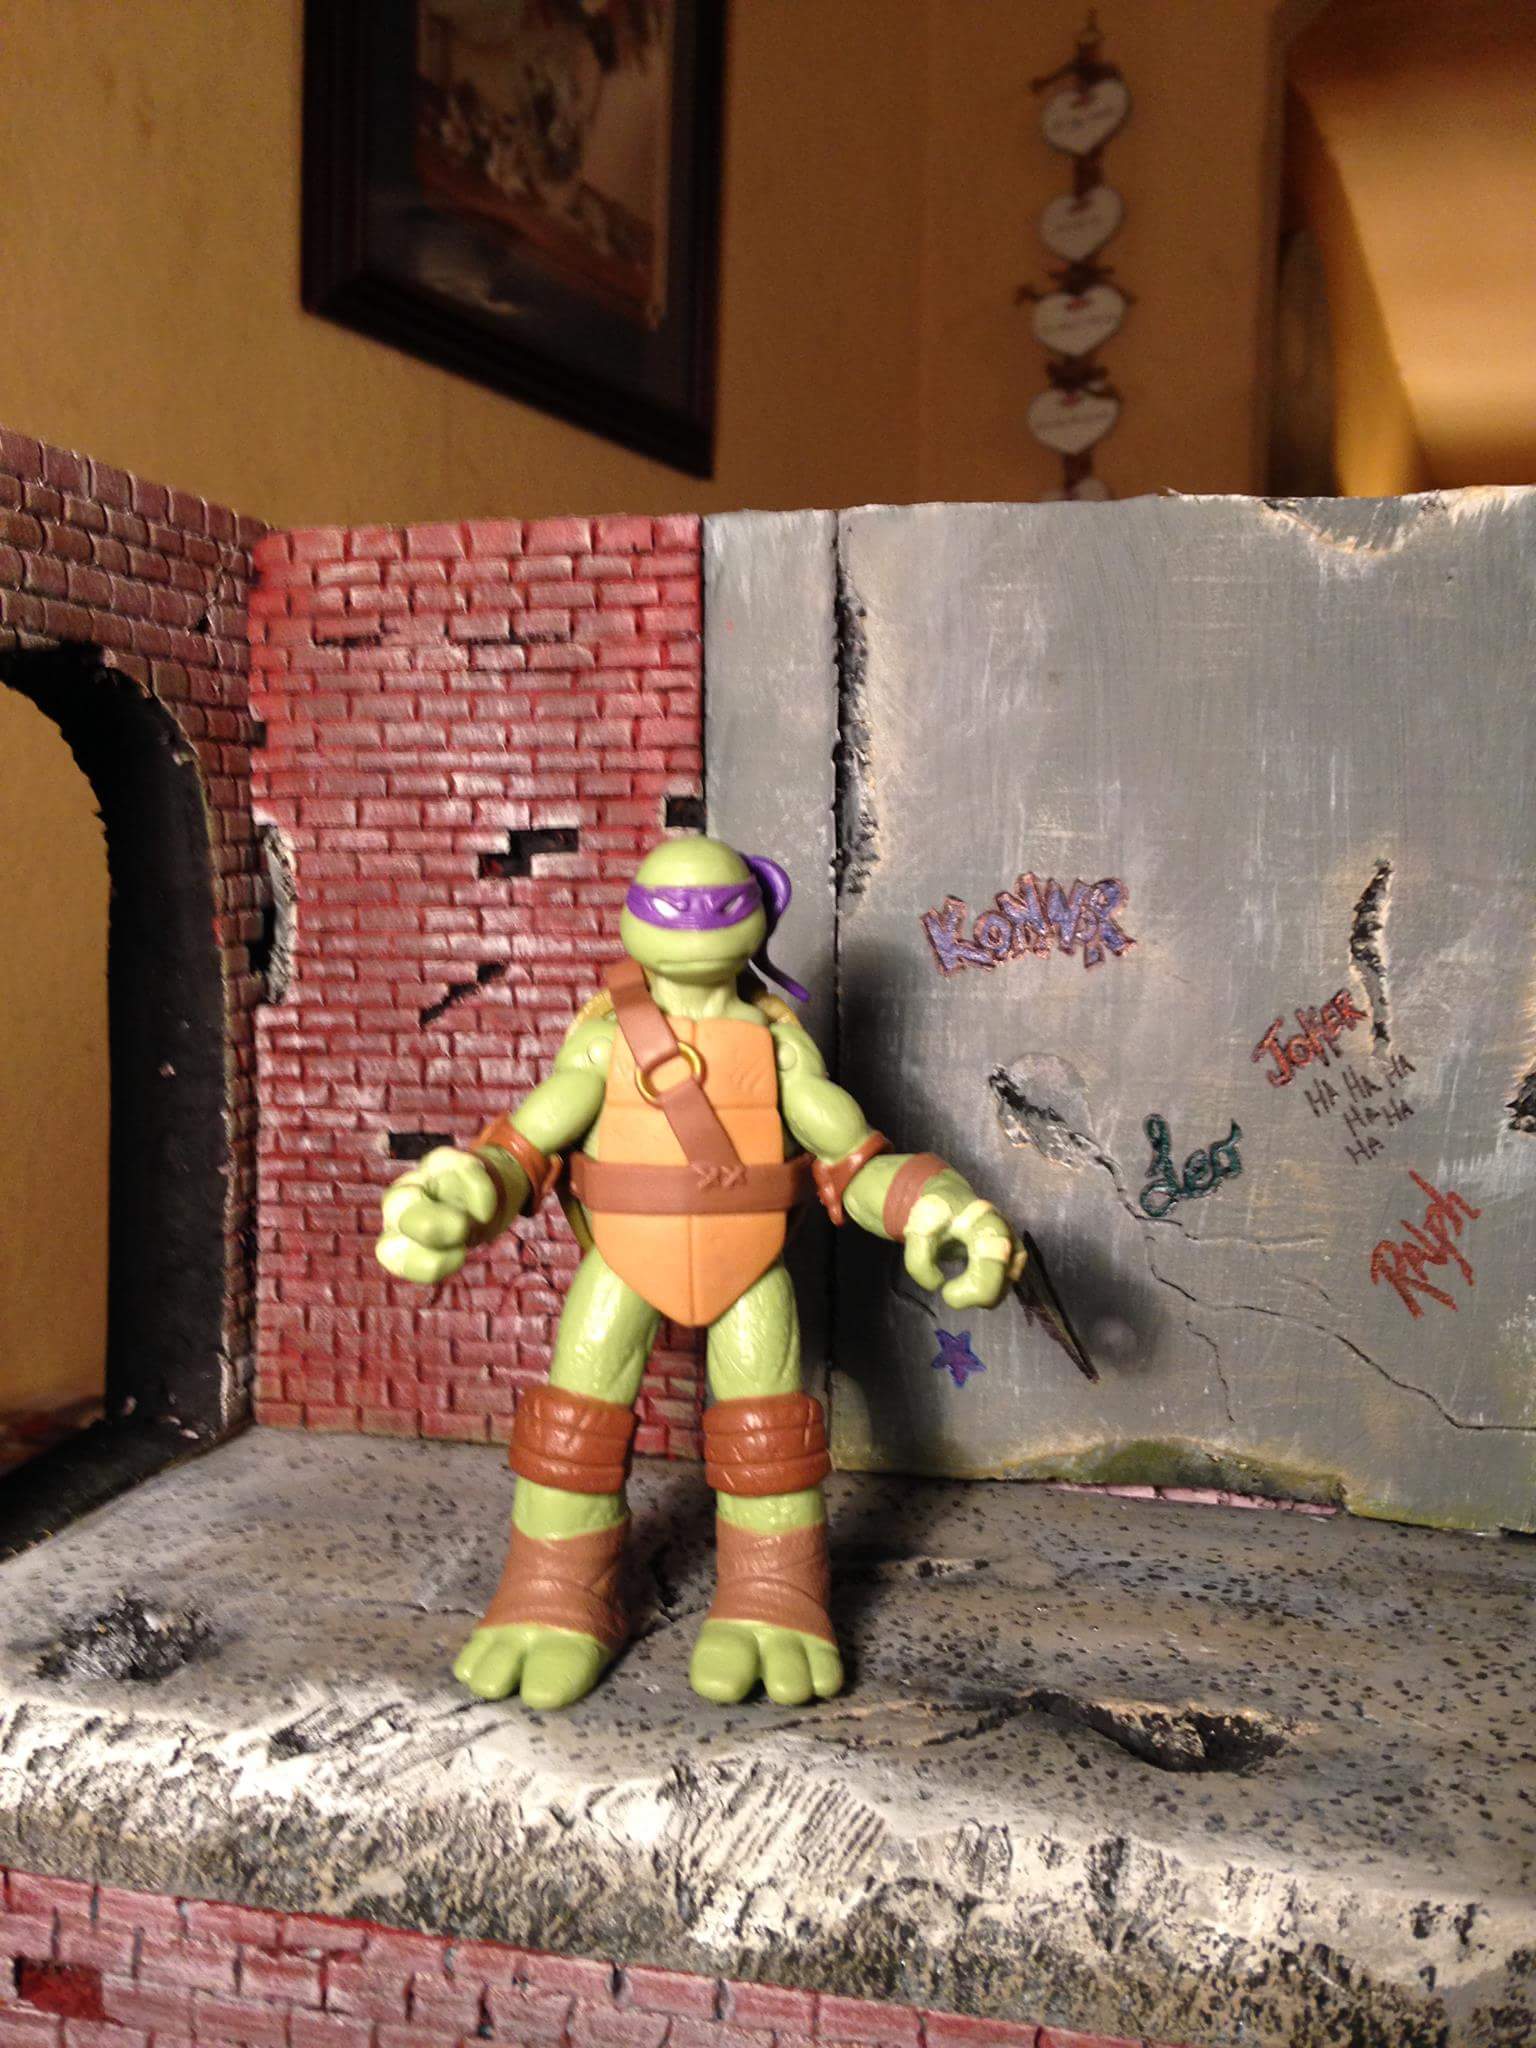 His wife said "Our son wanted something for his ninja turtles to play on."